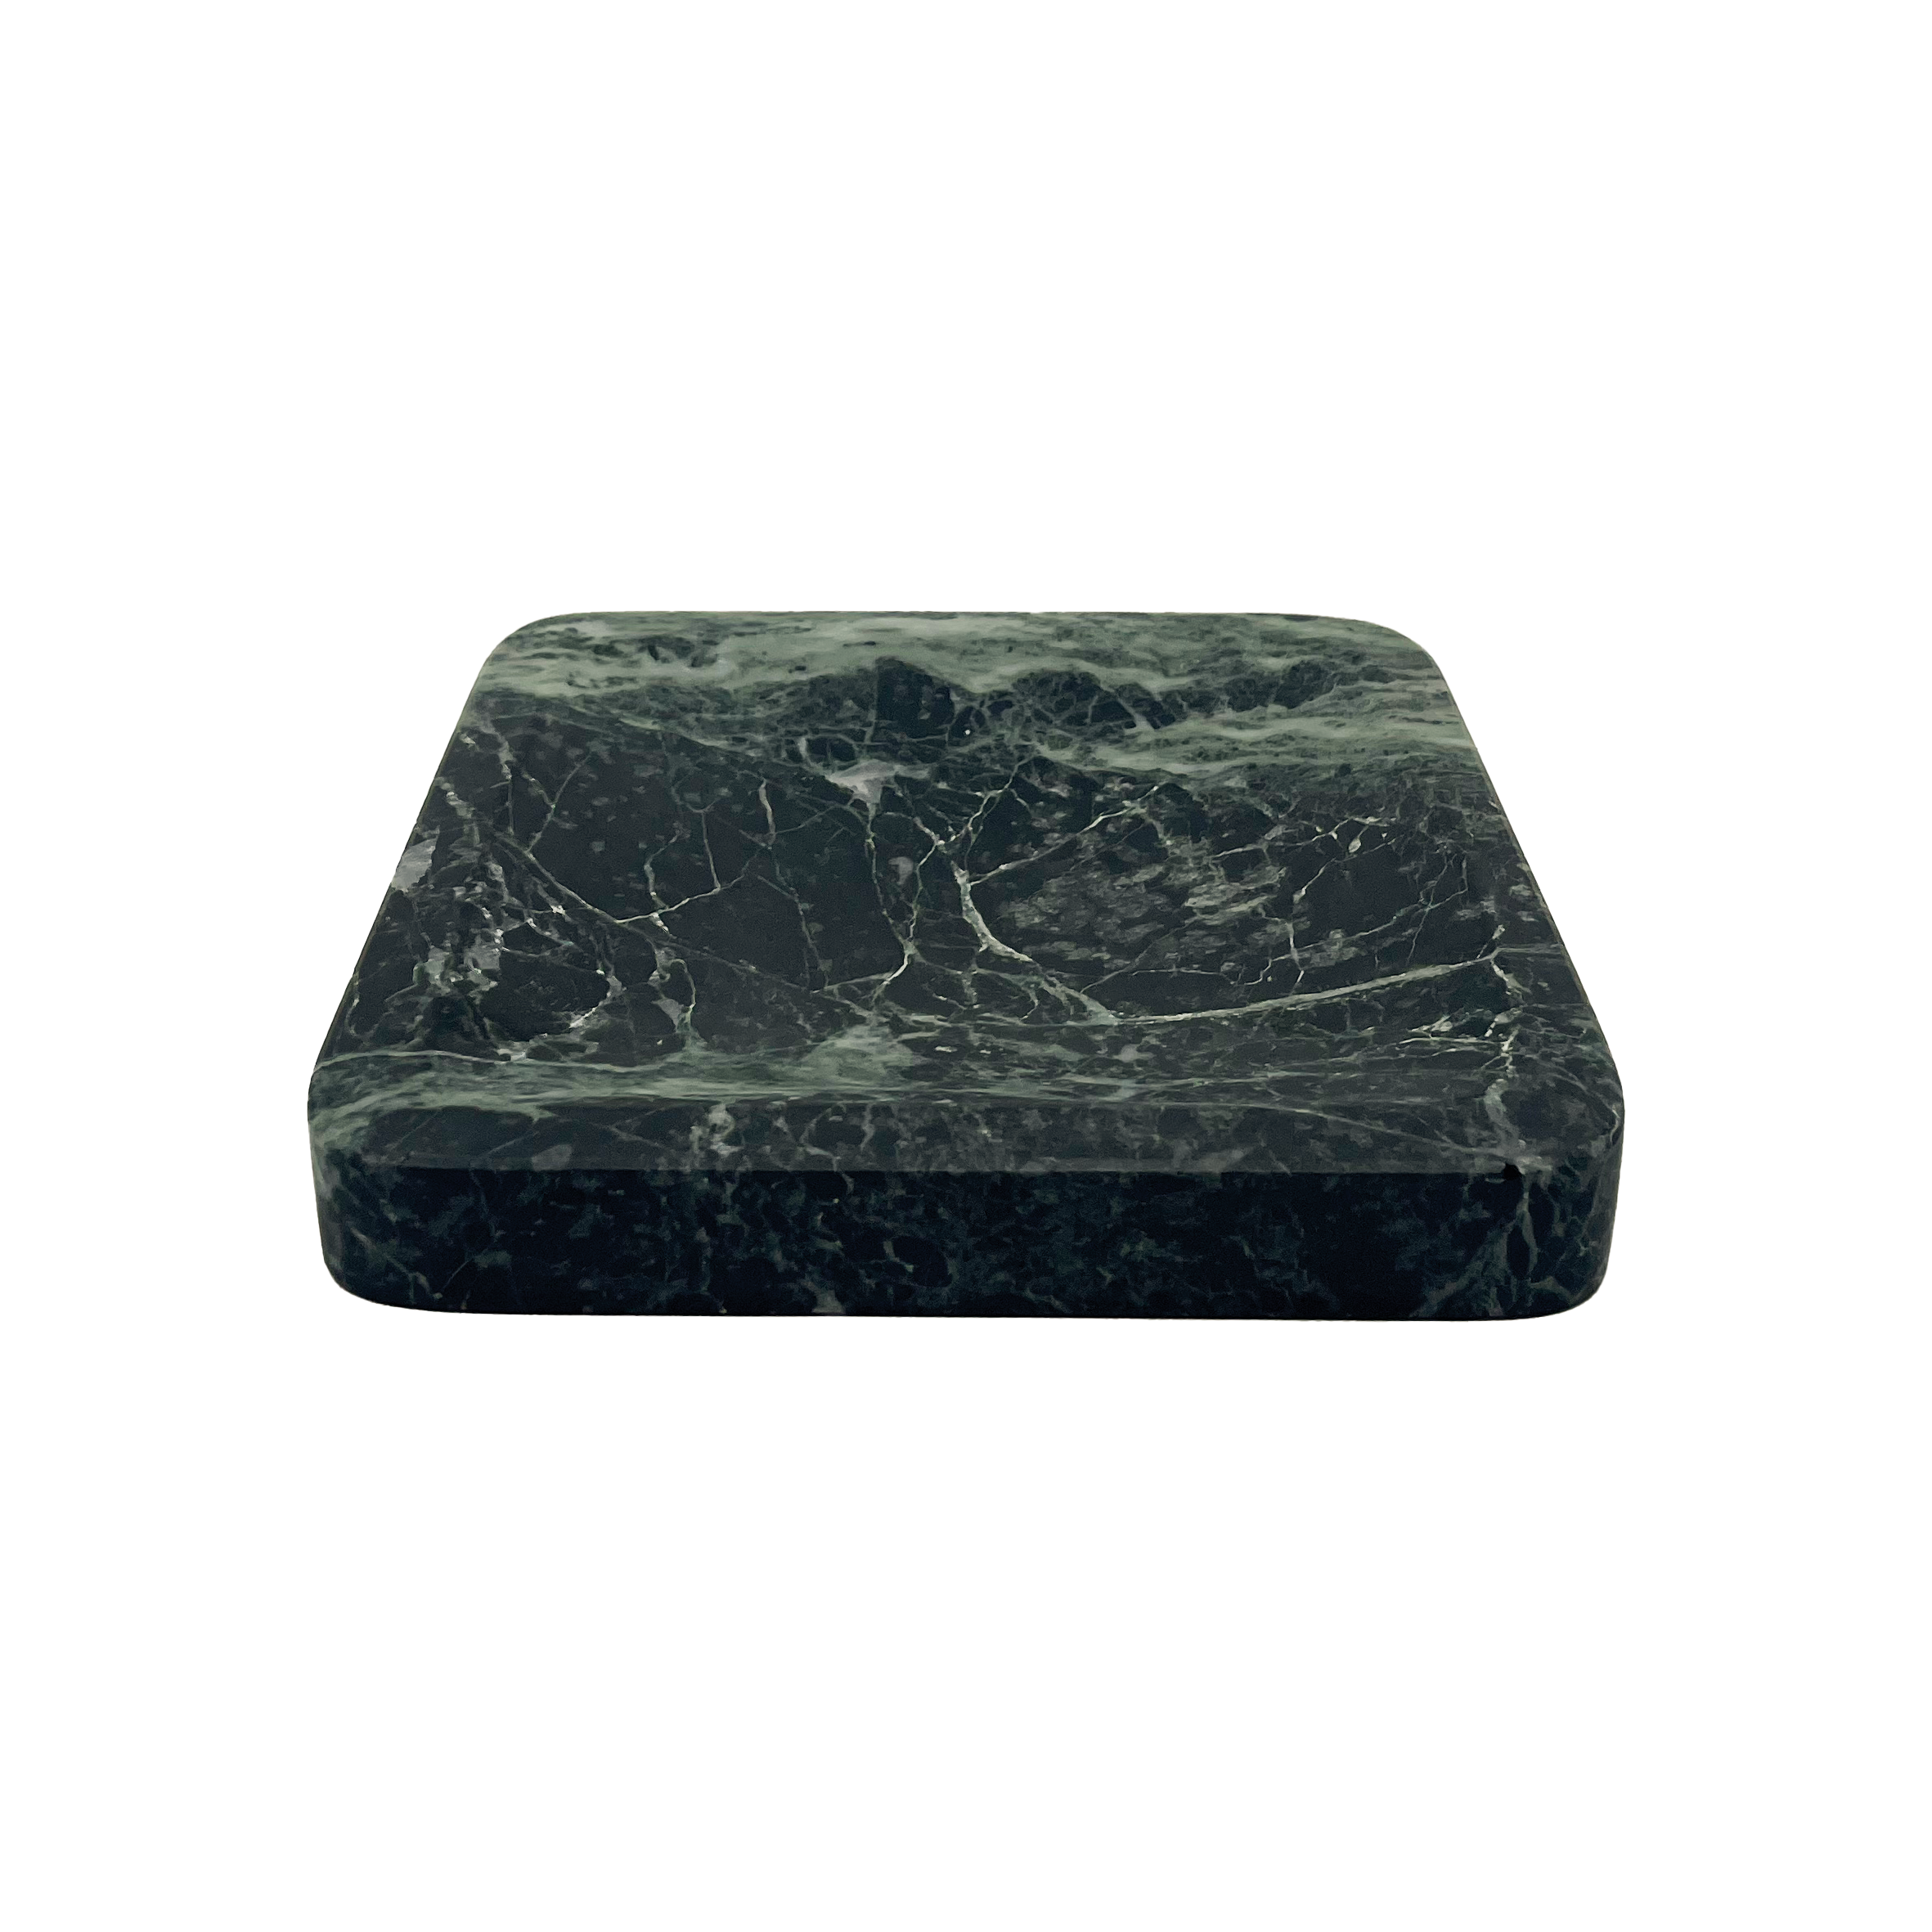 Plate Tinos Green marble S